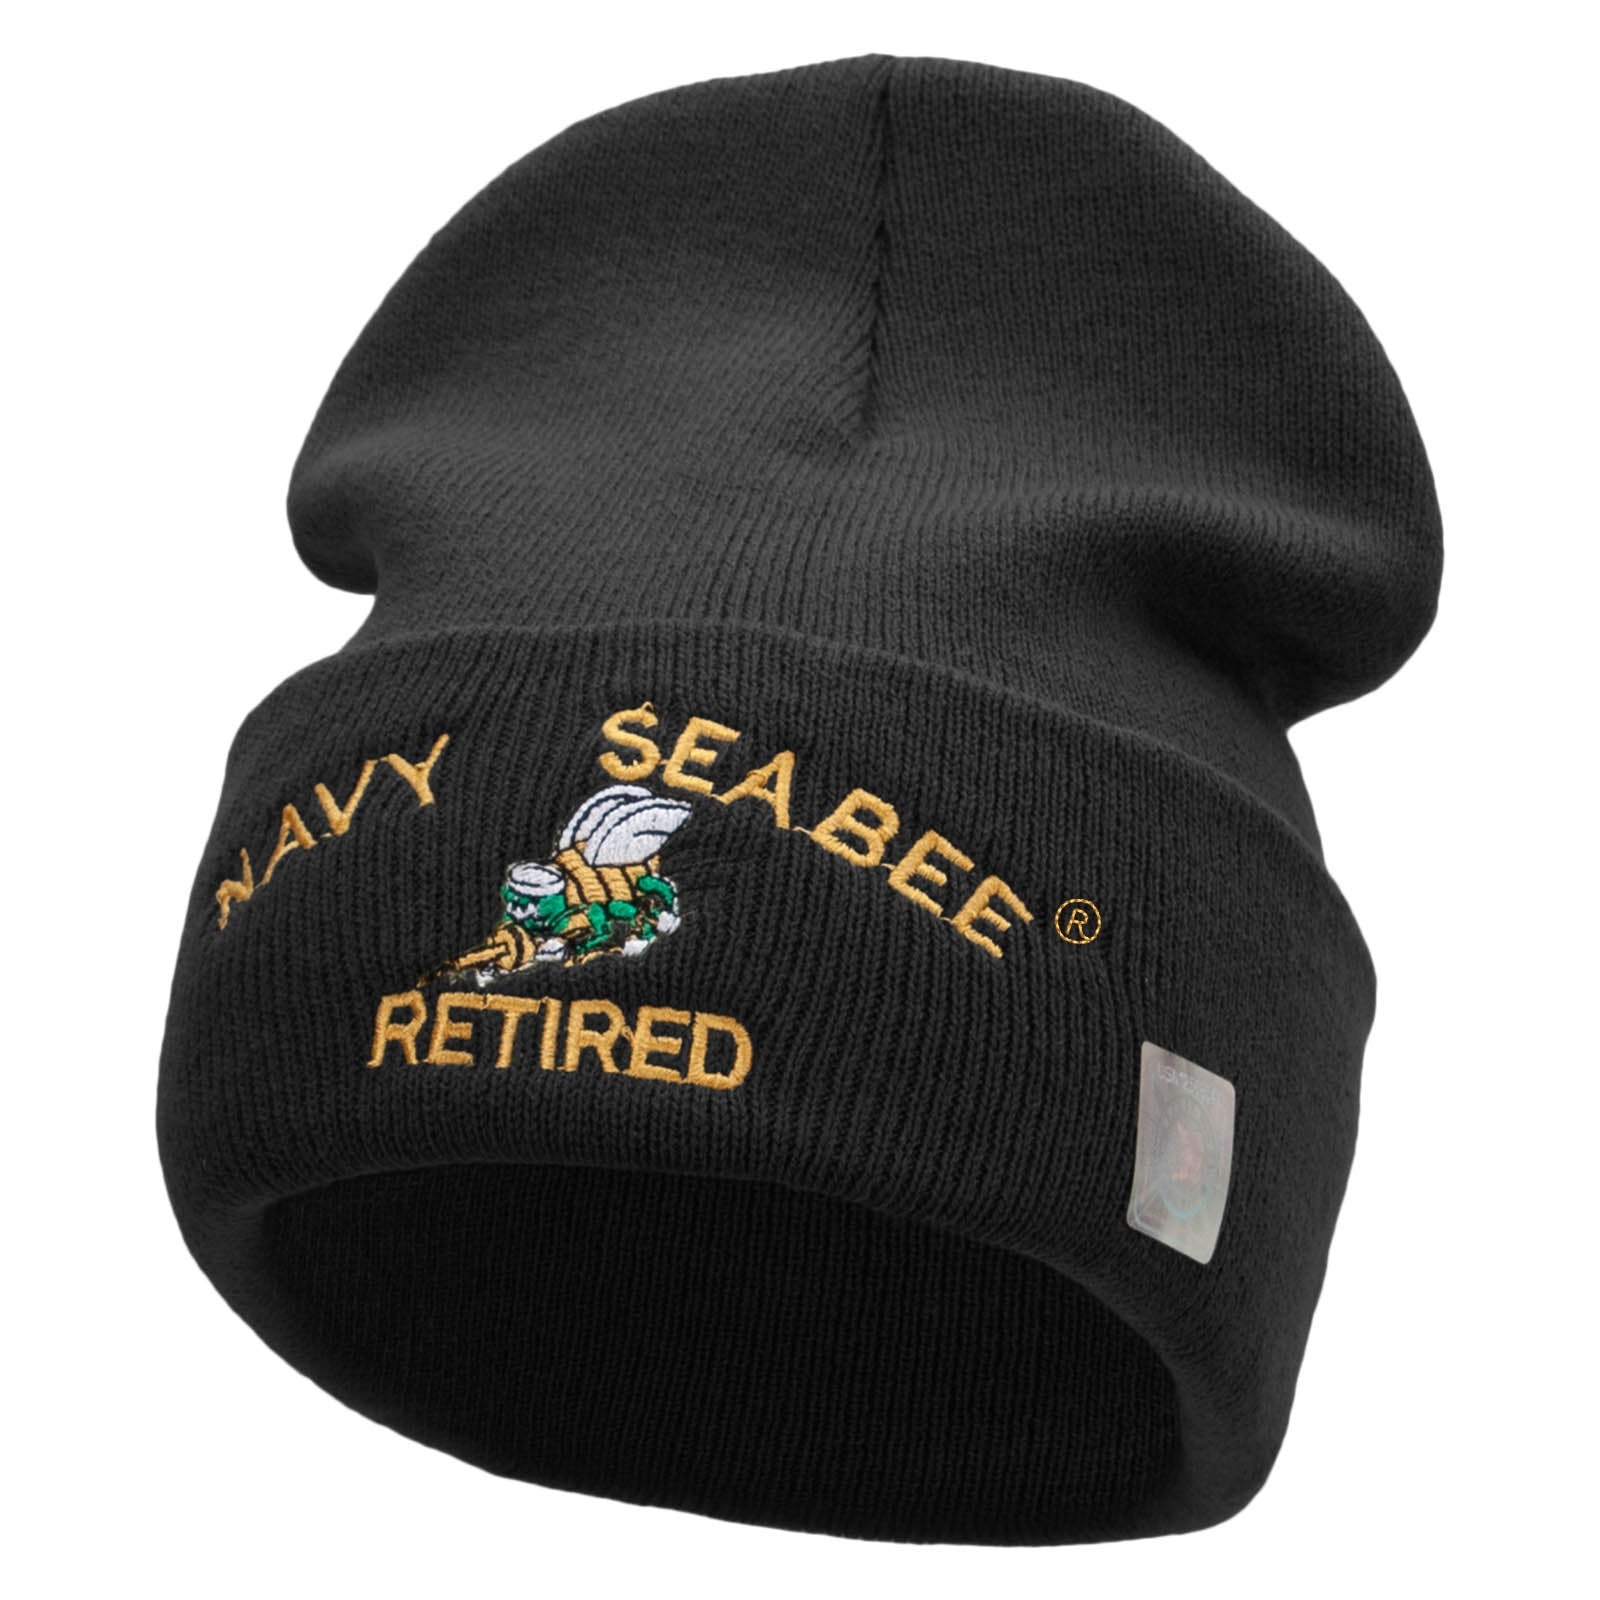 Licensed US Navy Seabee Retired Military Embroidered Long Beanie Made in USA - Black OSFM